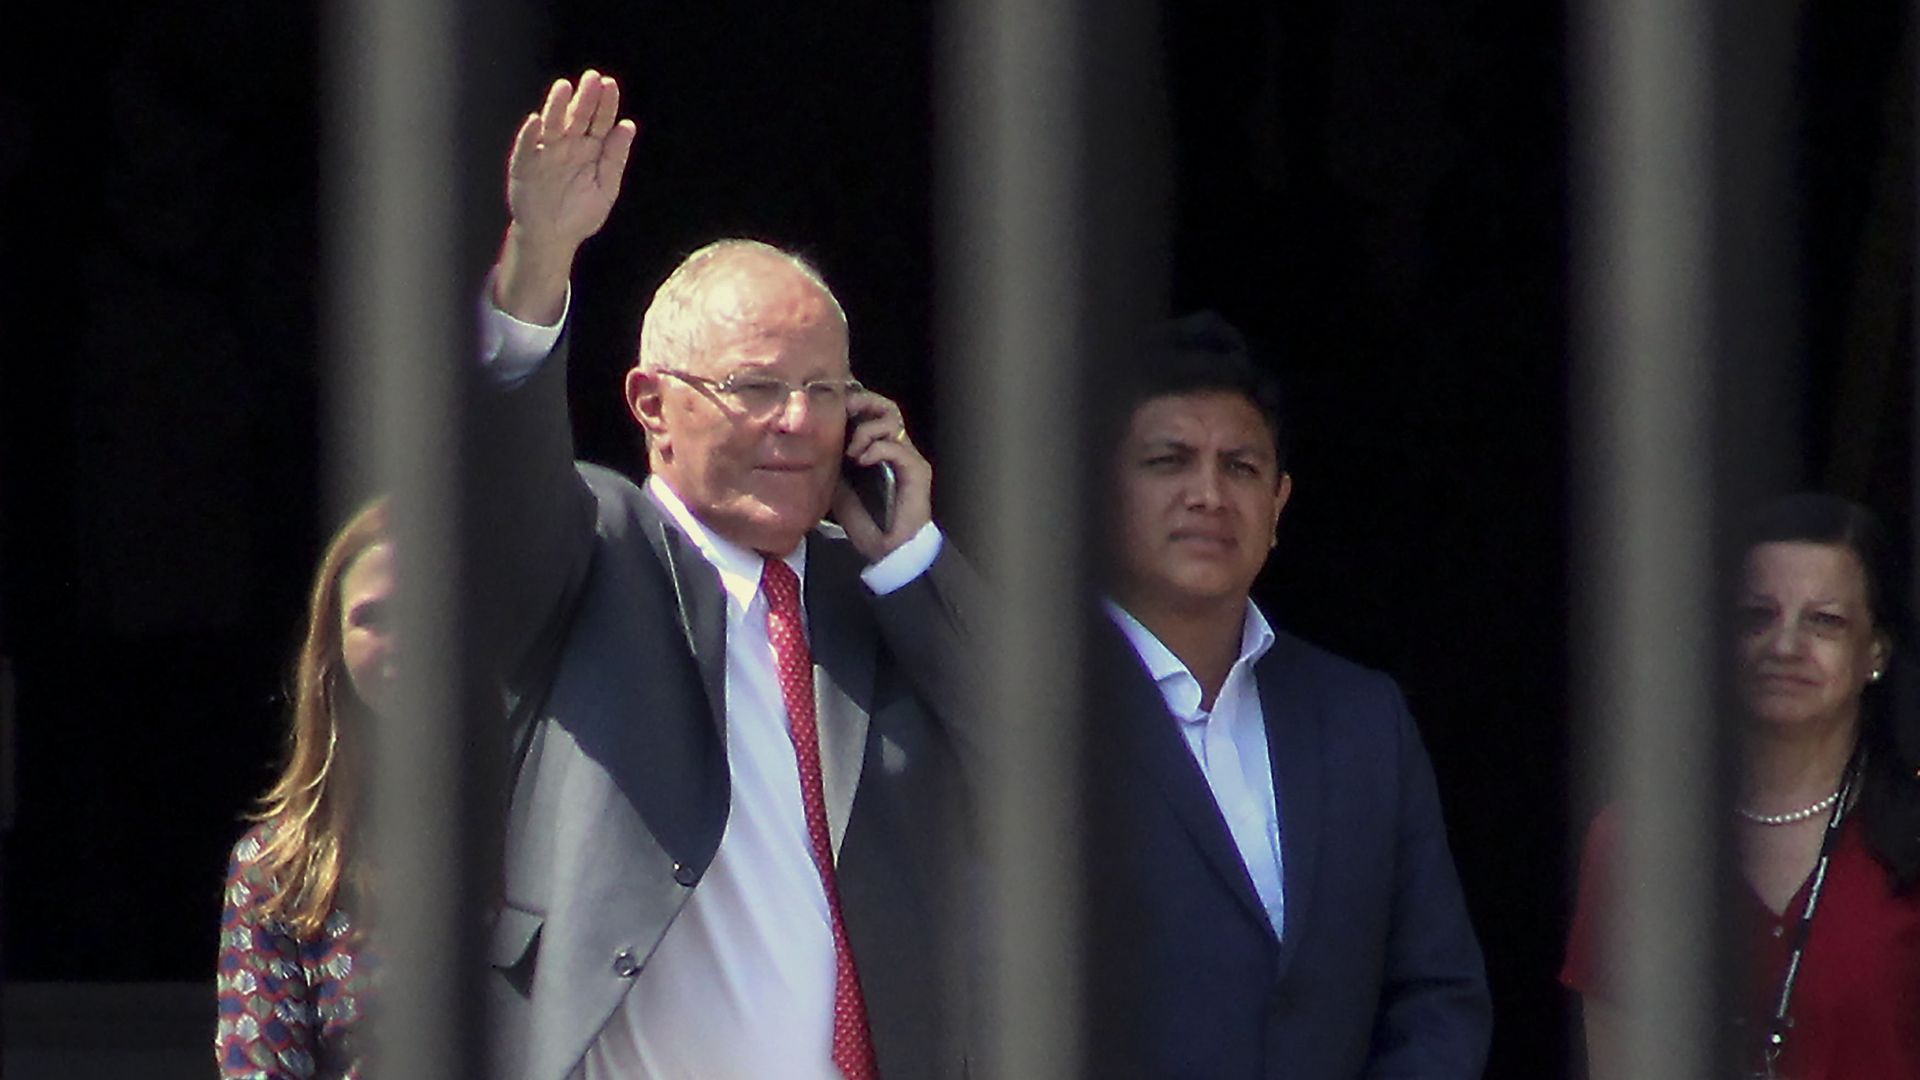 Peruvian President Peruvian President Pedro Pablo Kuczynski waves after announcing his resignation